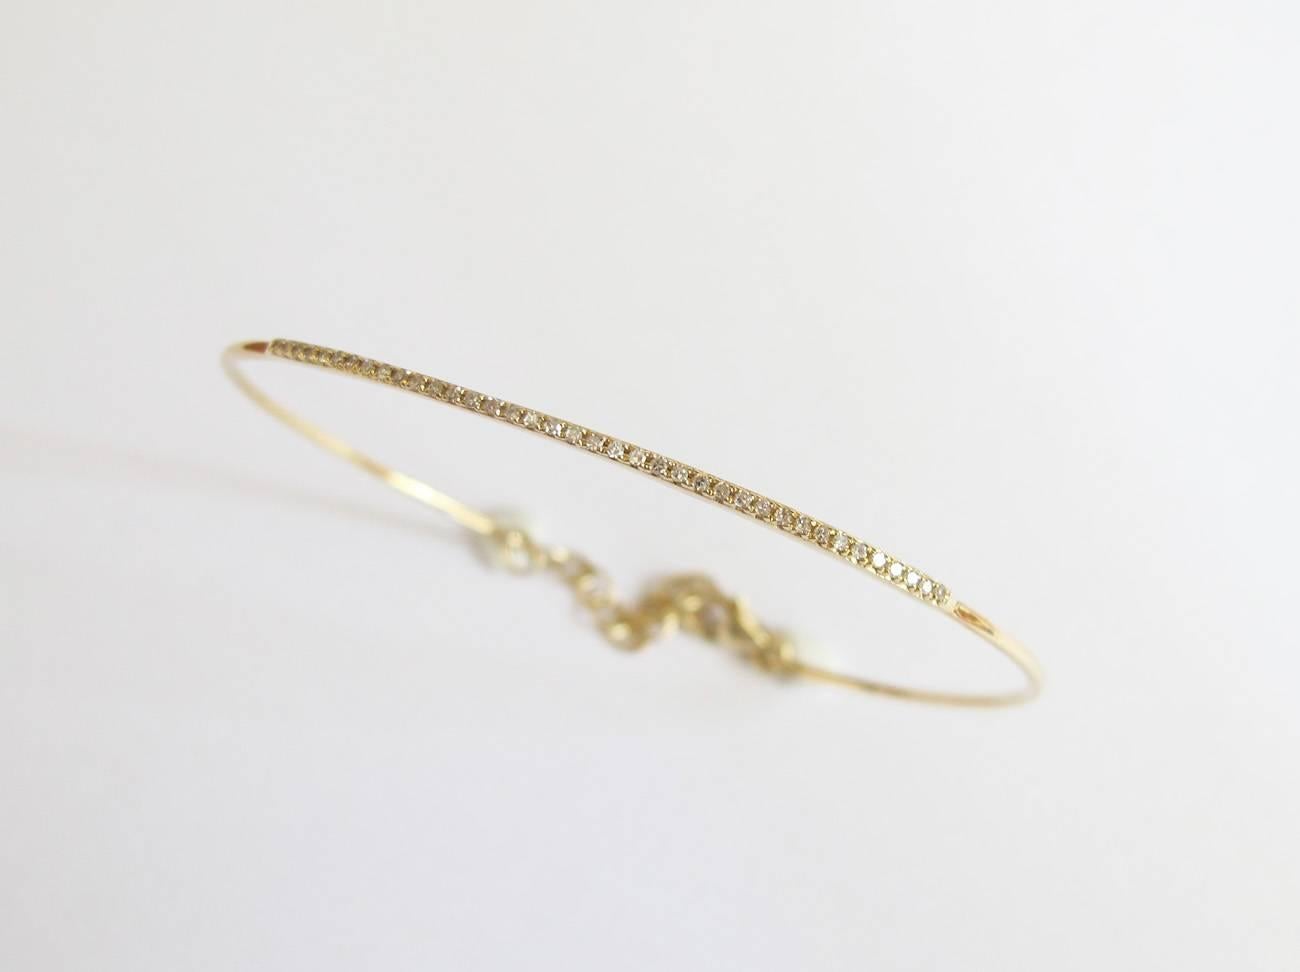 This thin and delicate 14K yellow gold pavé diamond bangle is perfect on its own or stacked with other bracelets.  The bangle has an extension (1.3 inches) and clasp to accommodate different wrist sizes.  

Diameter: 60mm X 51mm
Diamond weight: